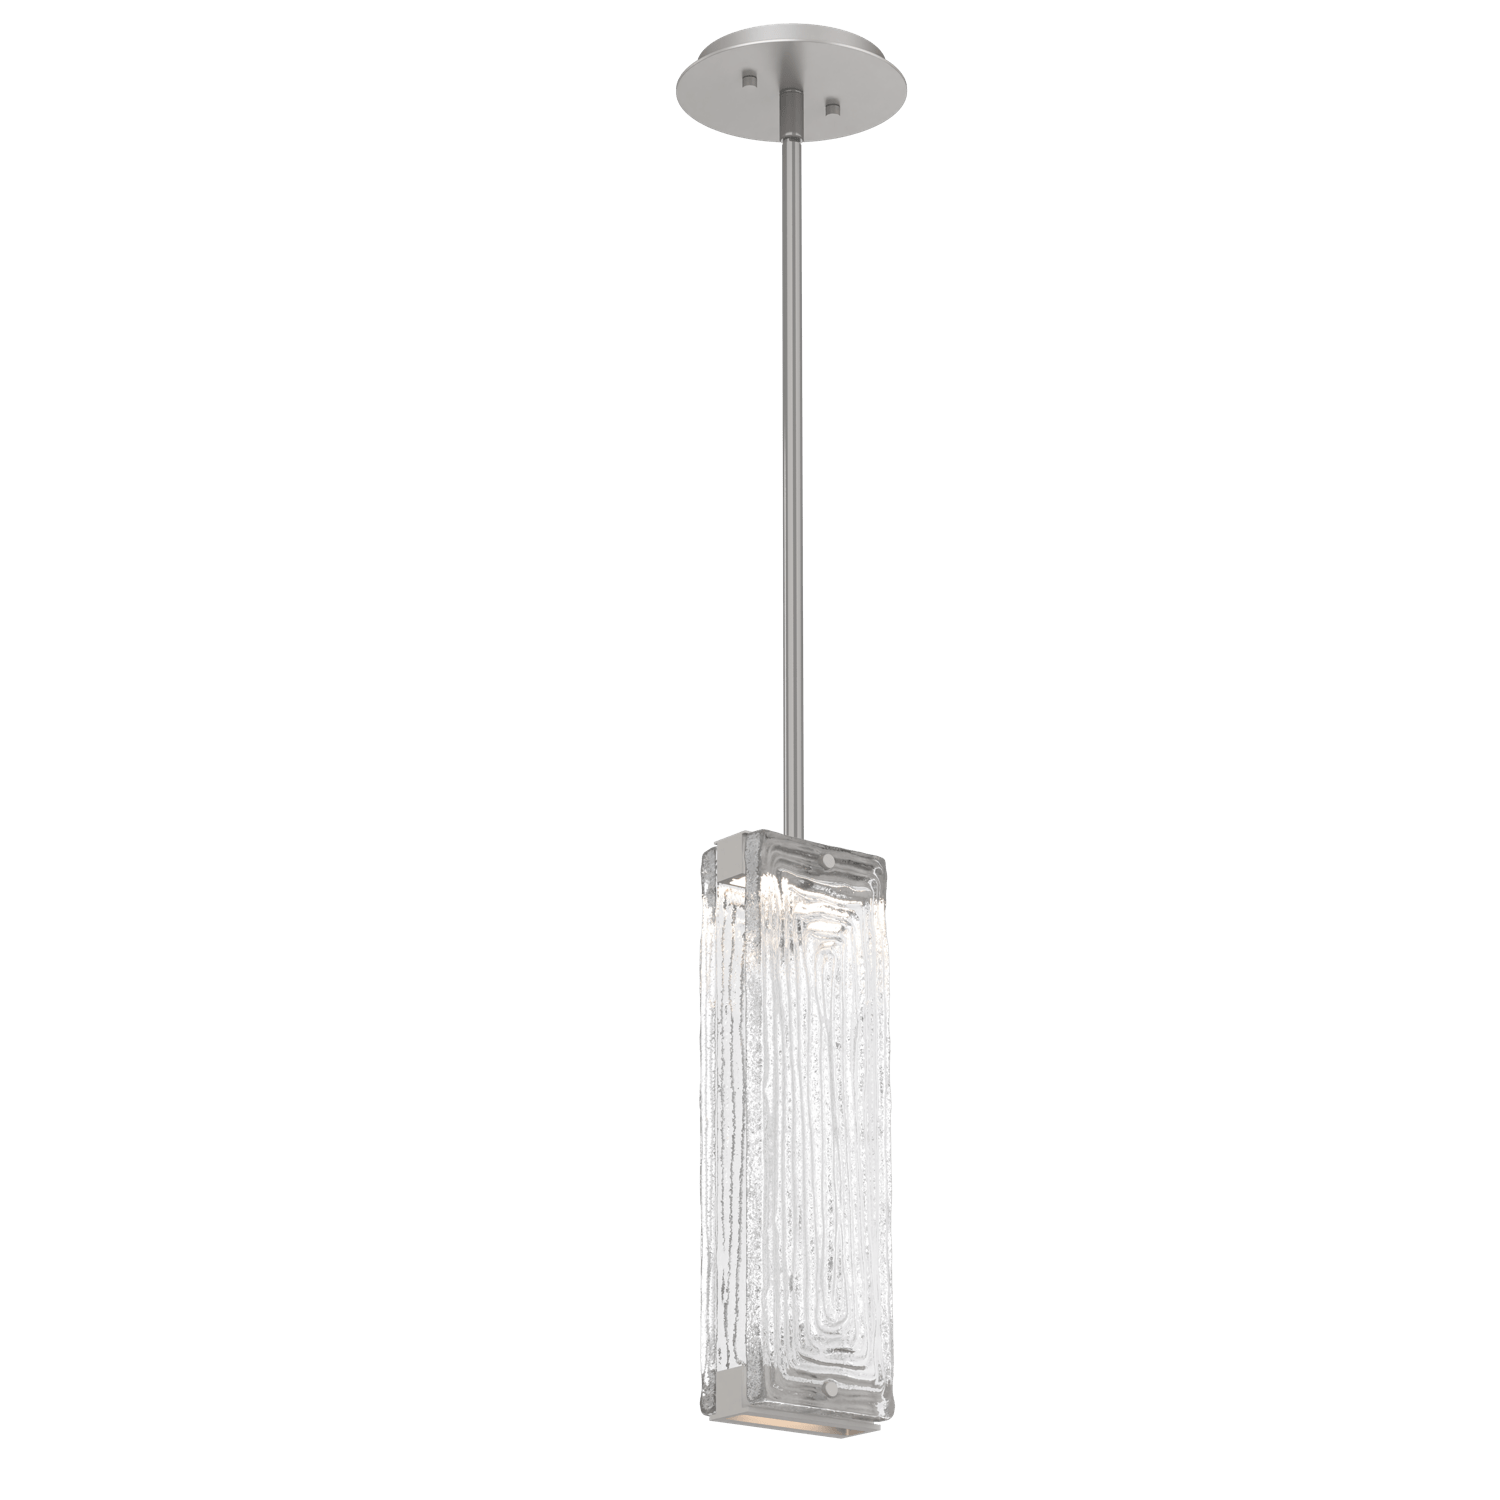 LAB0090-01-BS-TL-Hammerton-Studio-Tabulo-pendant-light-with-metallic-beige-silver-finish-and-clear-linea-cast-glass-shade-and-LED-lamping